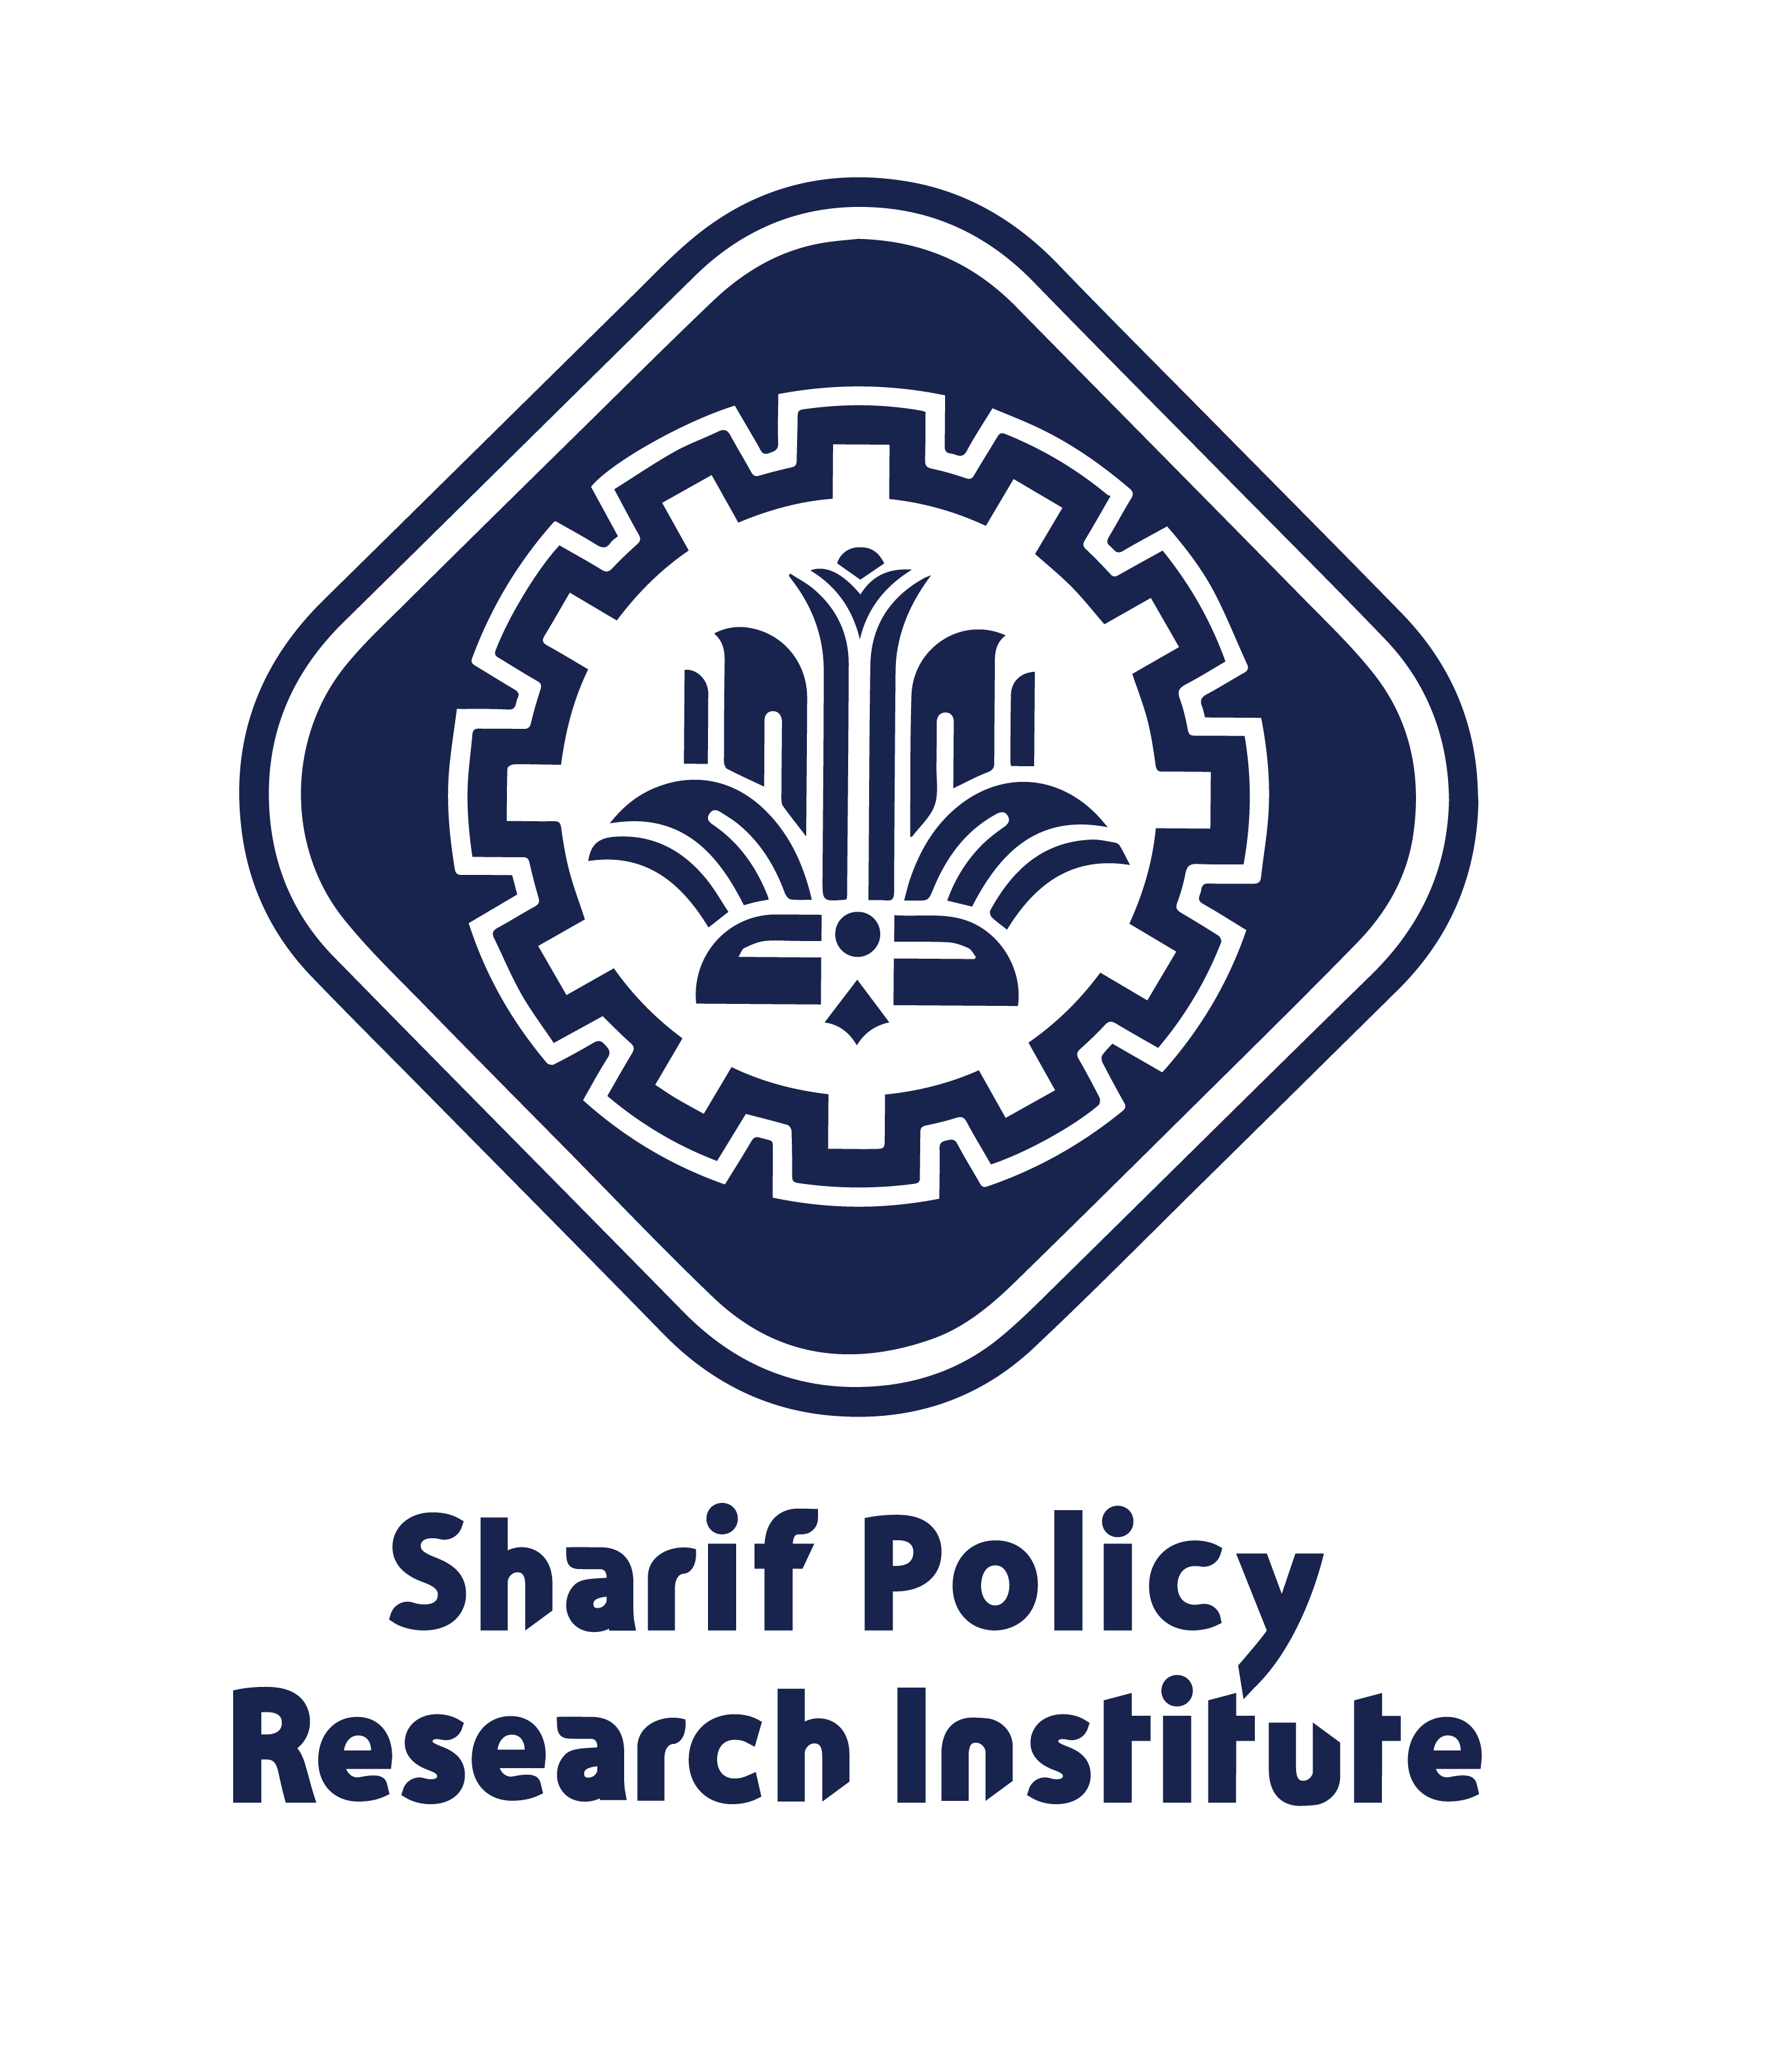 Sharif Policy Research Institute